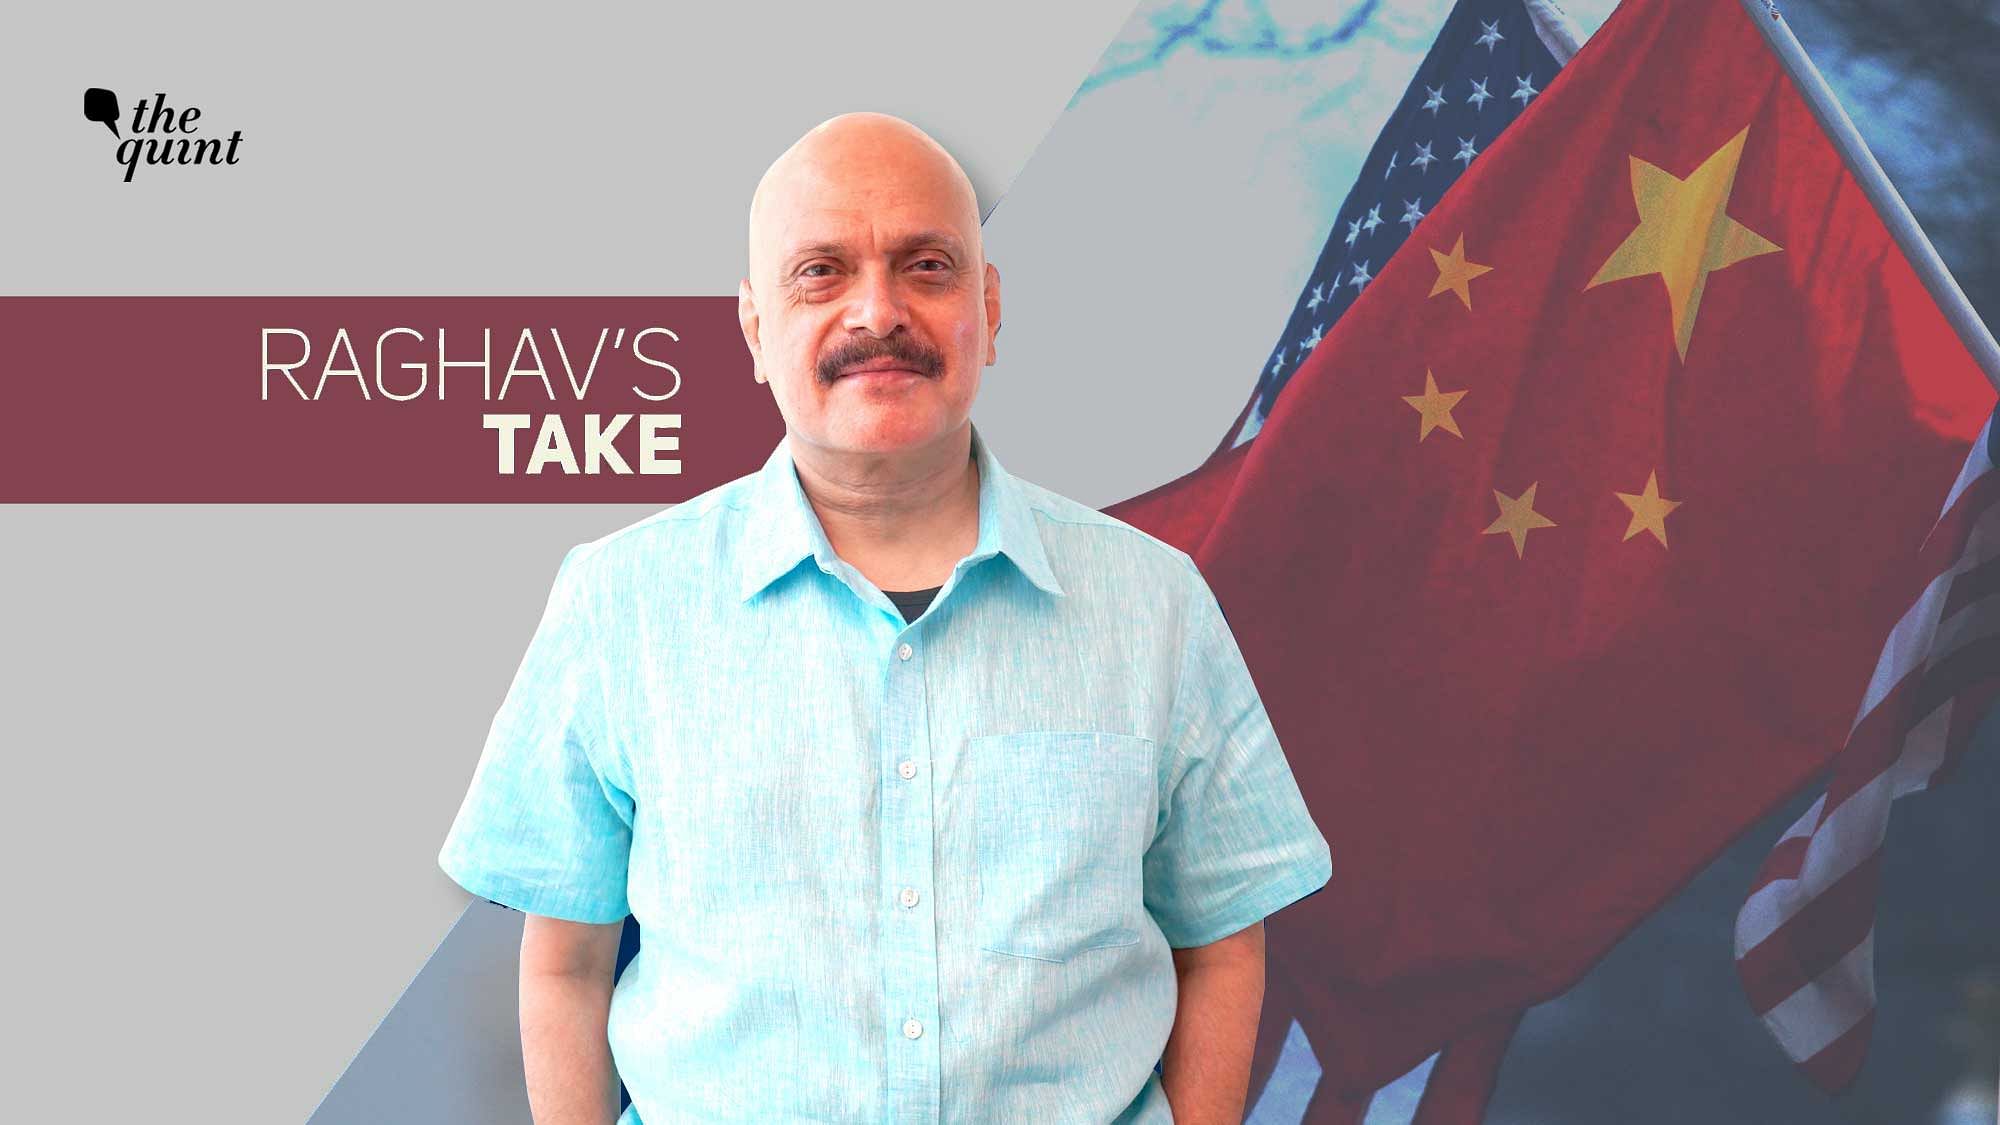 <div class="paragraphs"><p>The Quint’s Editor-in-Chief Raghav Bahl shares his views on China's crackdown on consumer internet companies.</p></div>